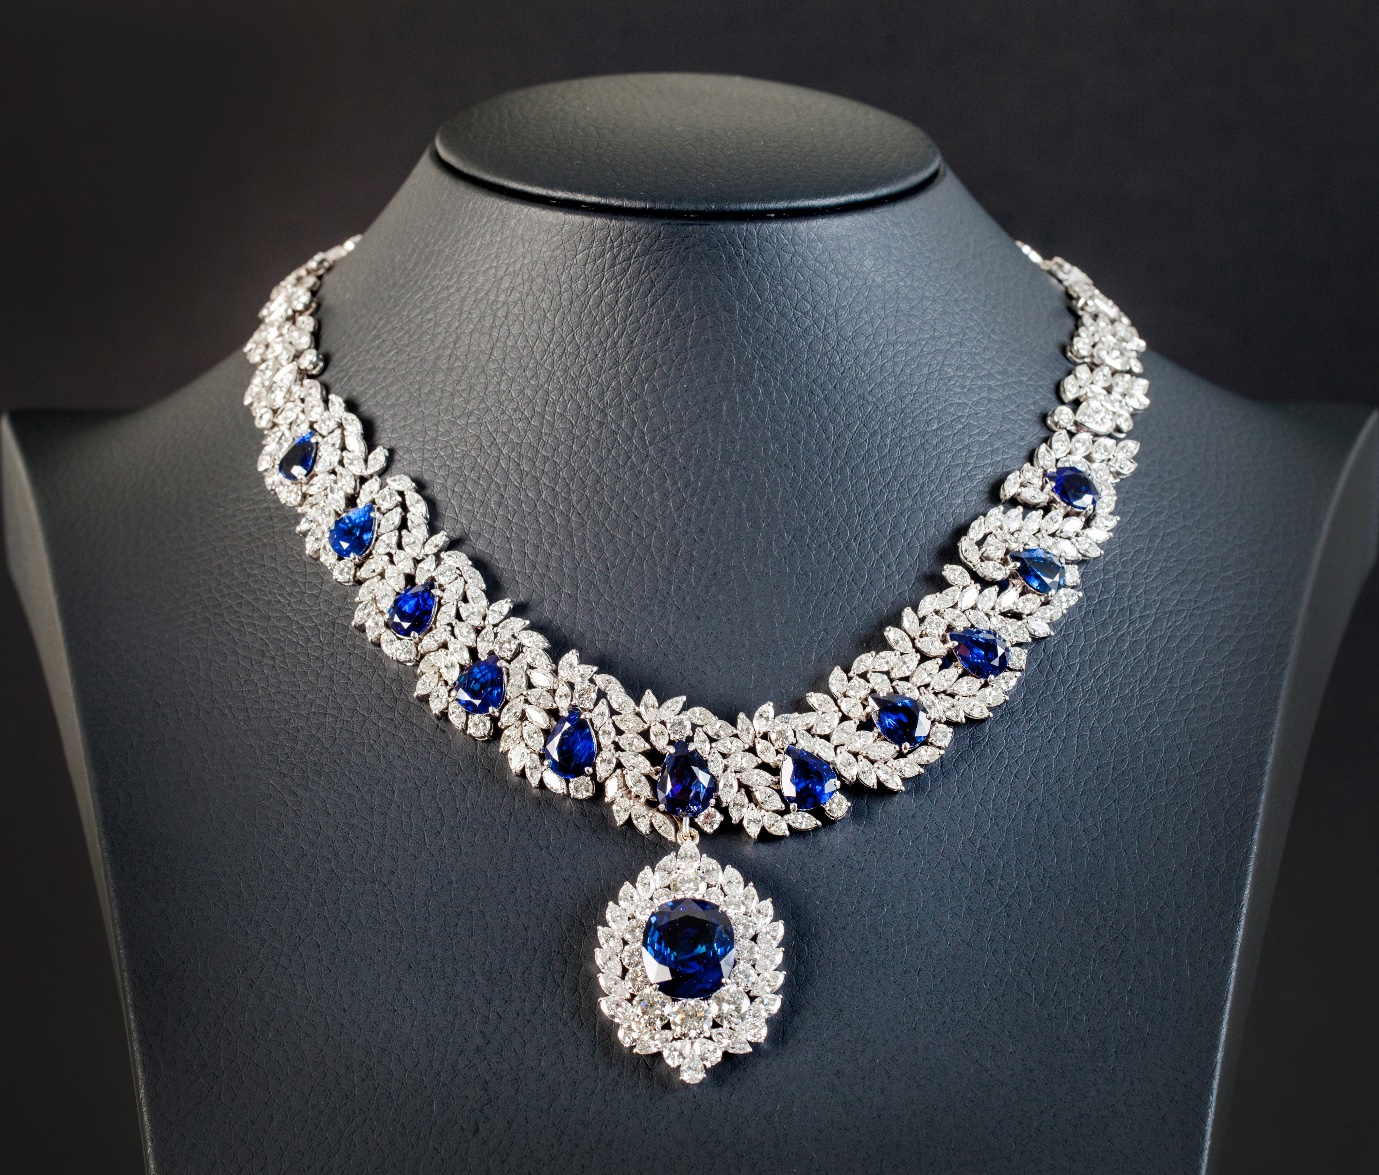 The Magic and Mystique of Blue Sapphires